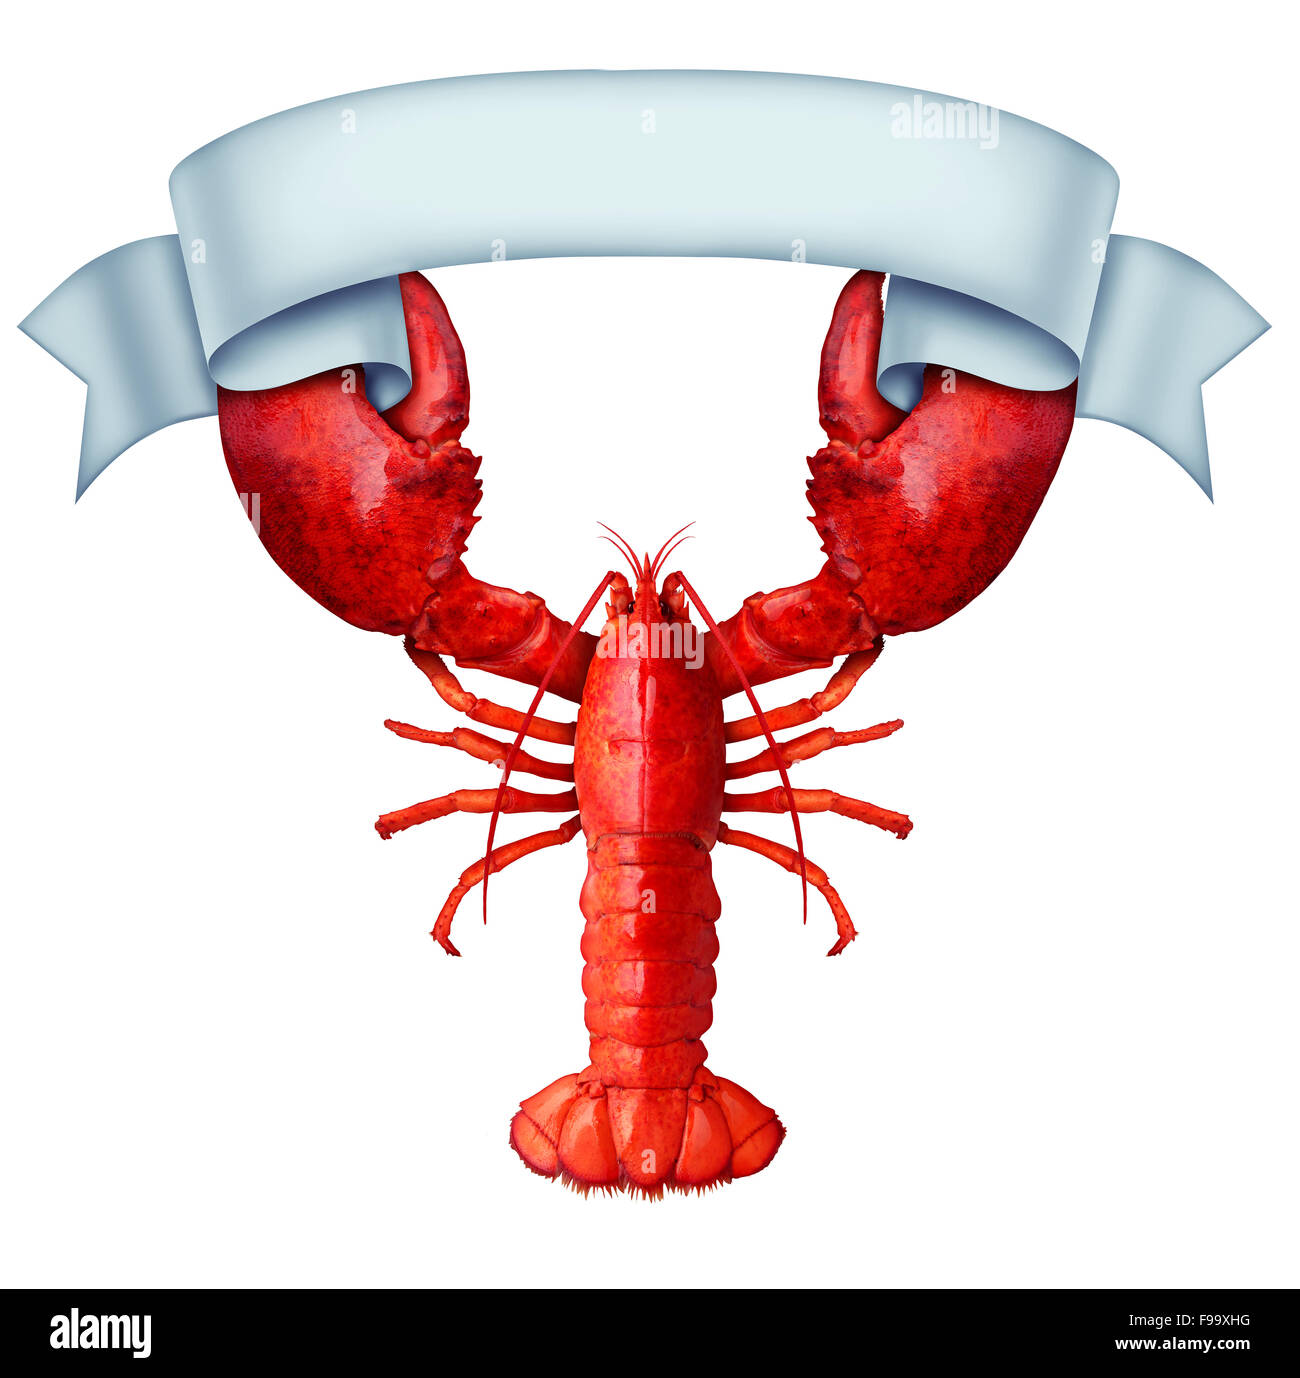 Lobster Banner ribbon with claws holding a blank sign as a fresh seafood message or shellfish food concept with a red shell crustacean isolated on a white background. Stock Photo